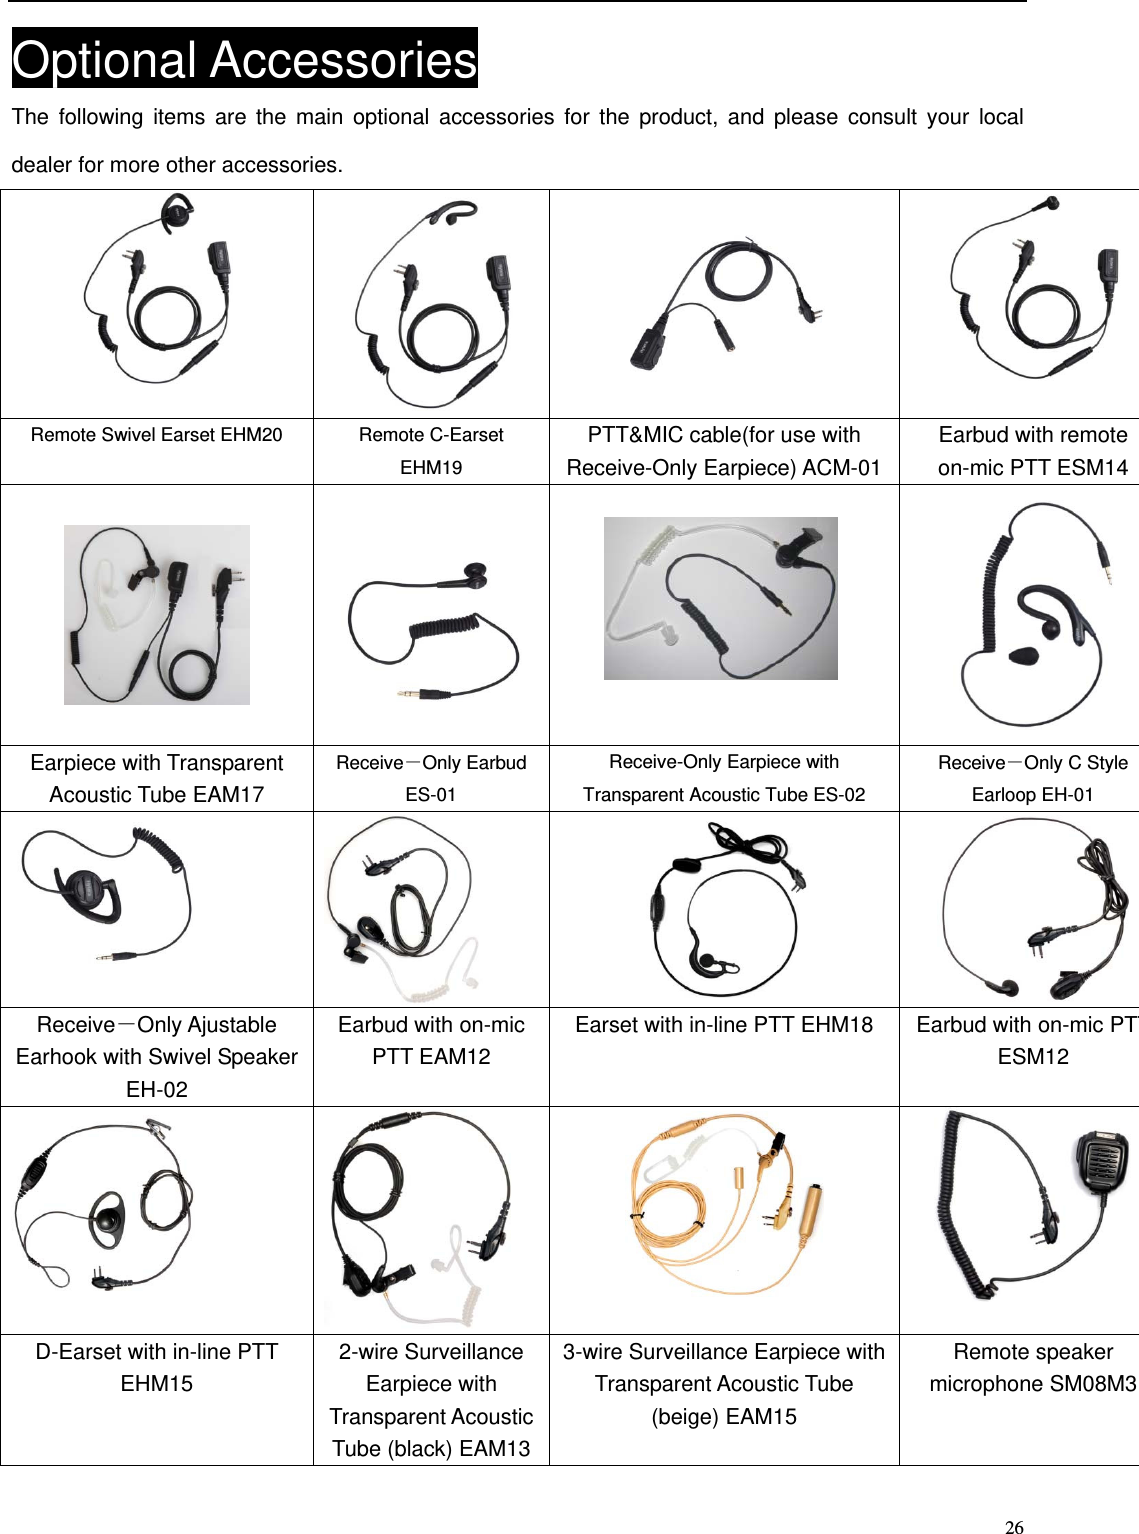                                                                                                              26Optional Accessories The following items are the main optional accessories for the product, and please consult your local dealer for more other accessories.     Remote Swivel Earset EHM20 Remote C-Earset   EHM19 PTT&amp;MIC cable(for use with Receive-Only Earpiece) ACM-01 Earbud with remote on-mic PTT ESM14         Earpiece with Transparent Acoustic Tube EAM17 Receive－Only Earbud   ES-01 Receive-Only Earpiece with Transparent Acoustic Tube ES-02 Receive－Only C Style Earloop EH-01   Receive－Only Ajustable Earhook with Swivel Speaker EH-02 Earbud with on-mic PTT EAM12 Earset with in-line PTT EHM18  Earbud with on-mic PTTESM12   D-Earset with in-line PTT EHM15 2-wire Surveillance Earpiece with Transparent Acoustic Tube (black) EAM133-wire Surveillance Earpiece with Transparent Acoustic Tube (beige) EAM15 Remote speaker microphone SM08M3